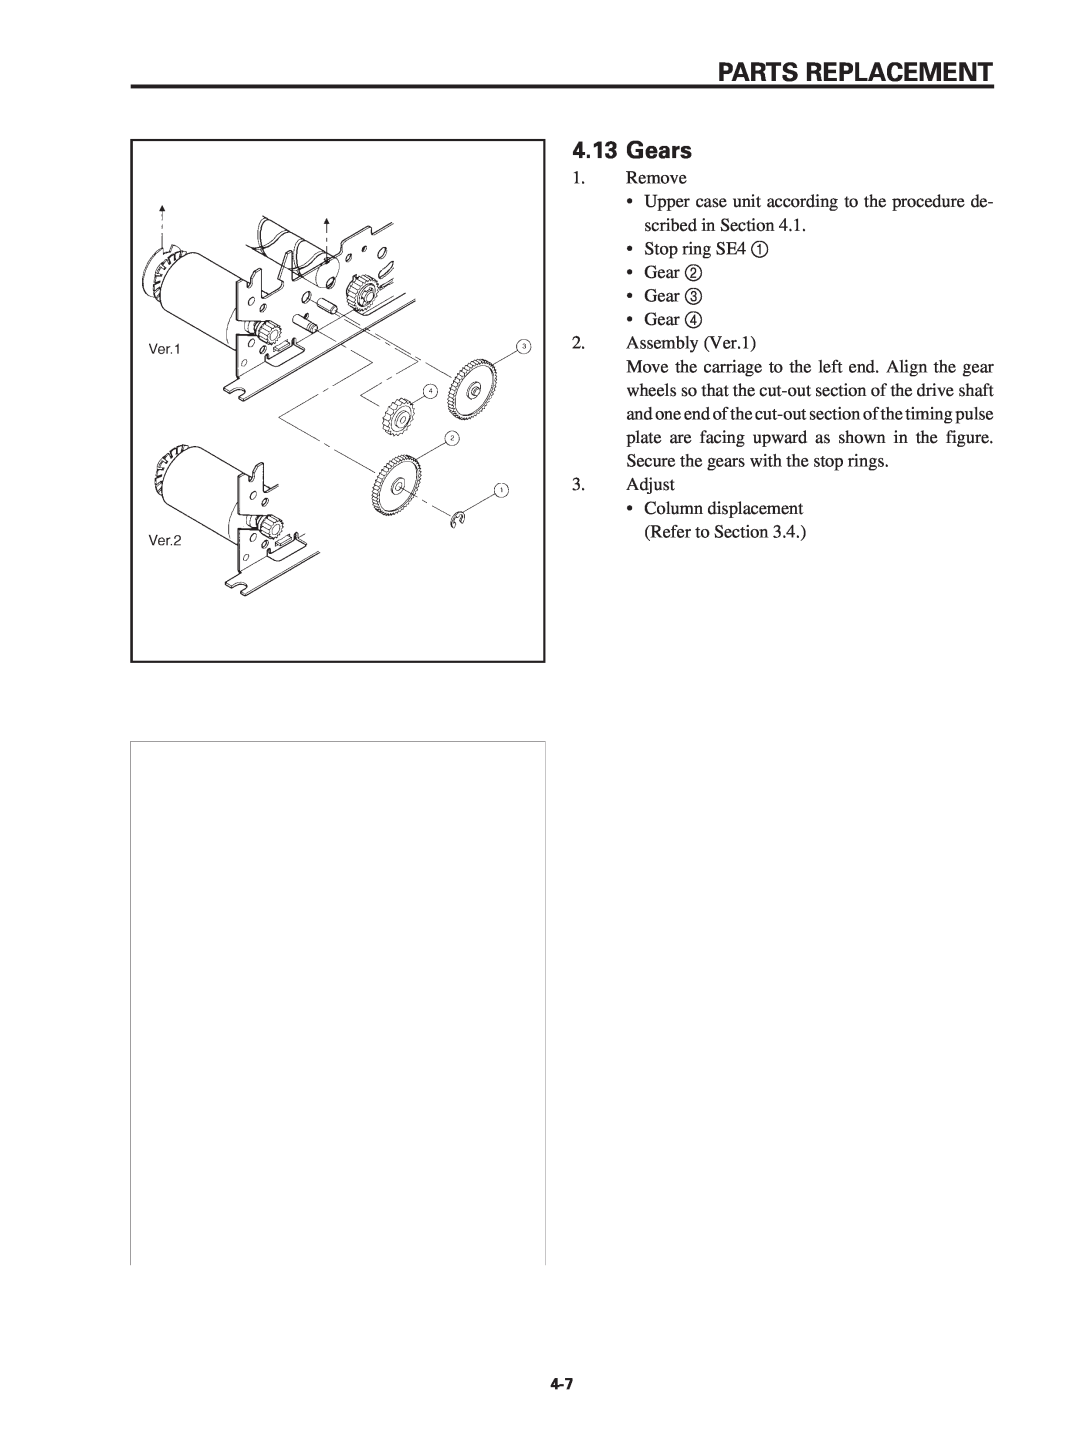 Star Micronics SP320S technical manual Gears, Parts Replacement 